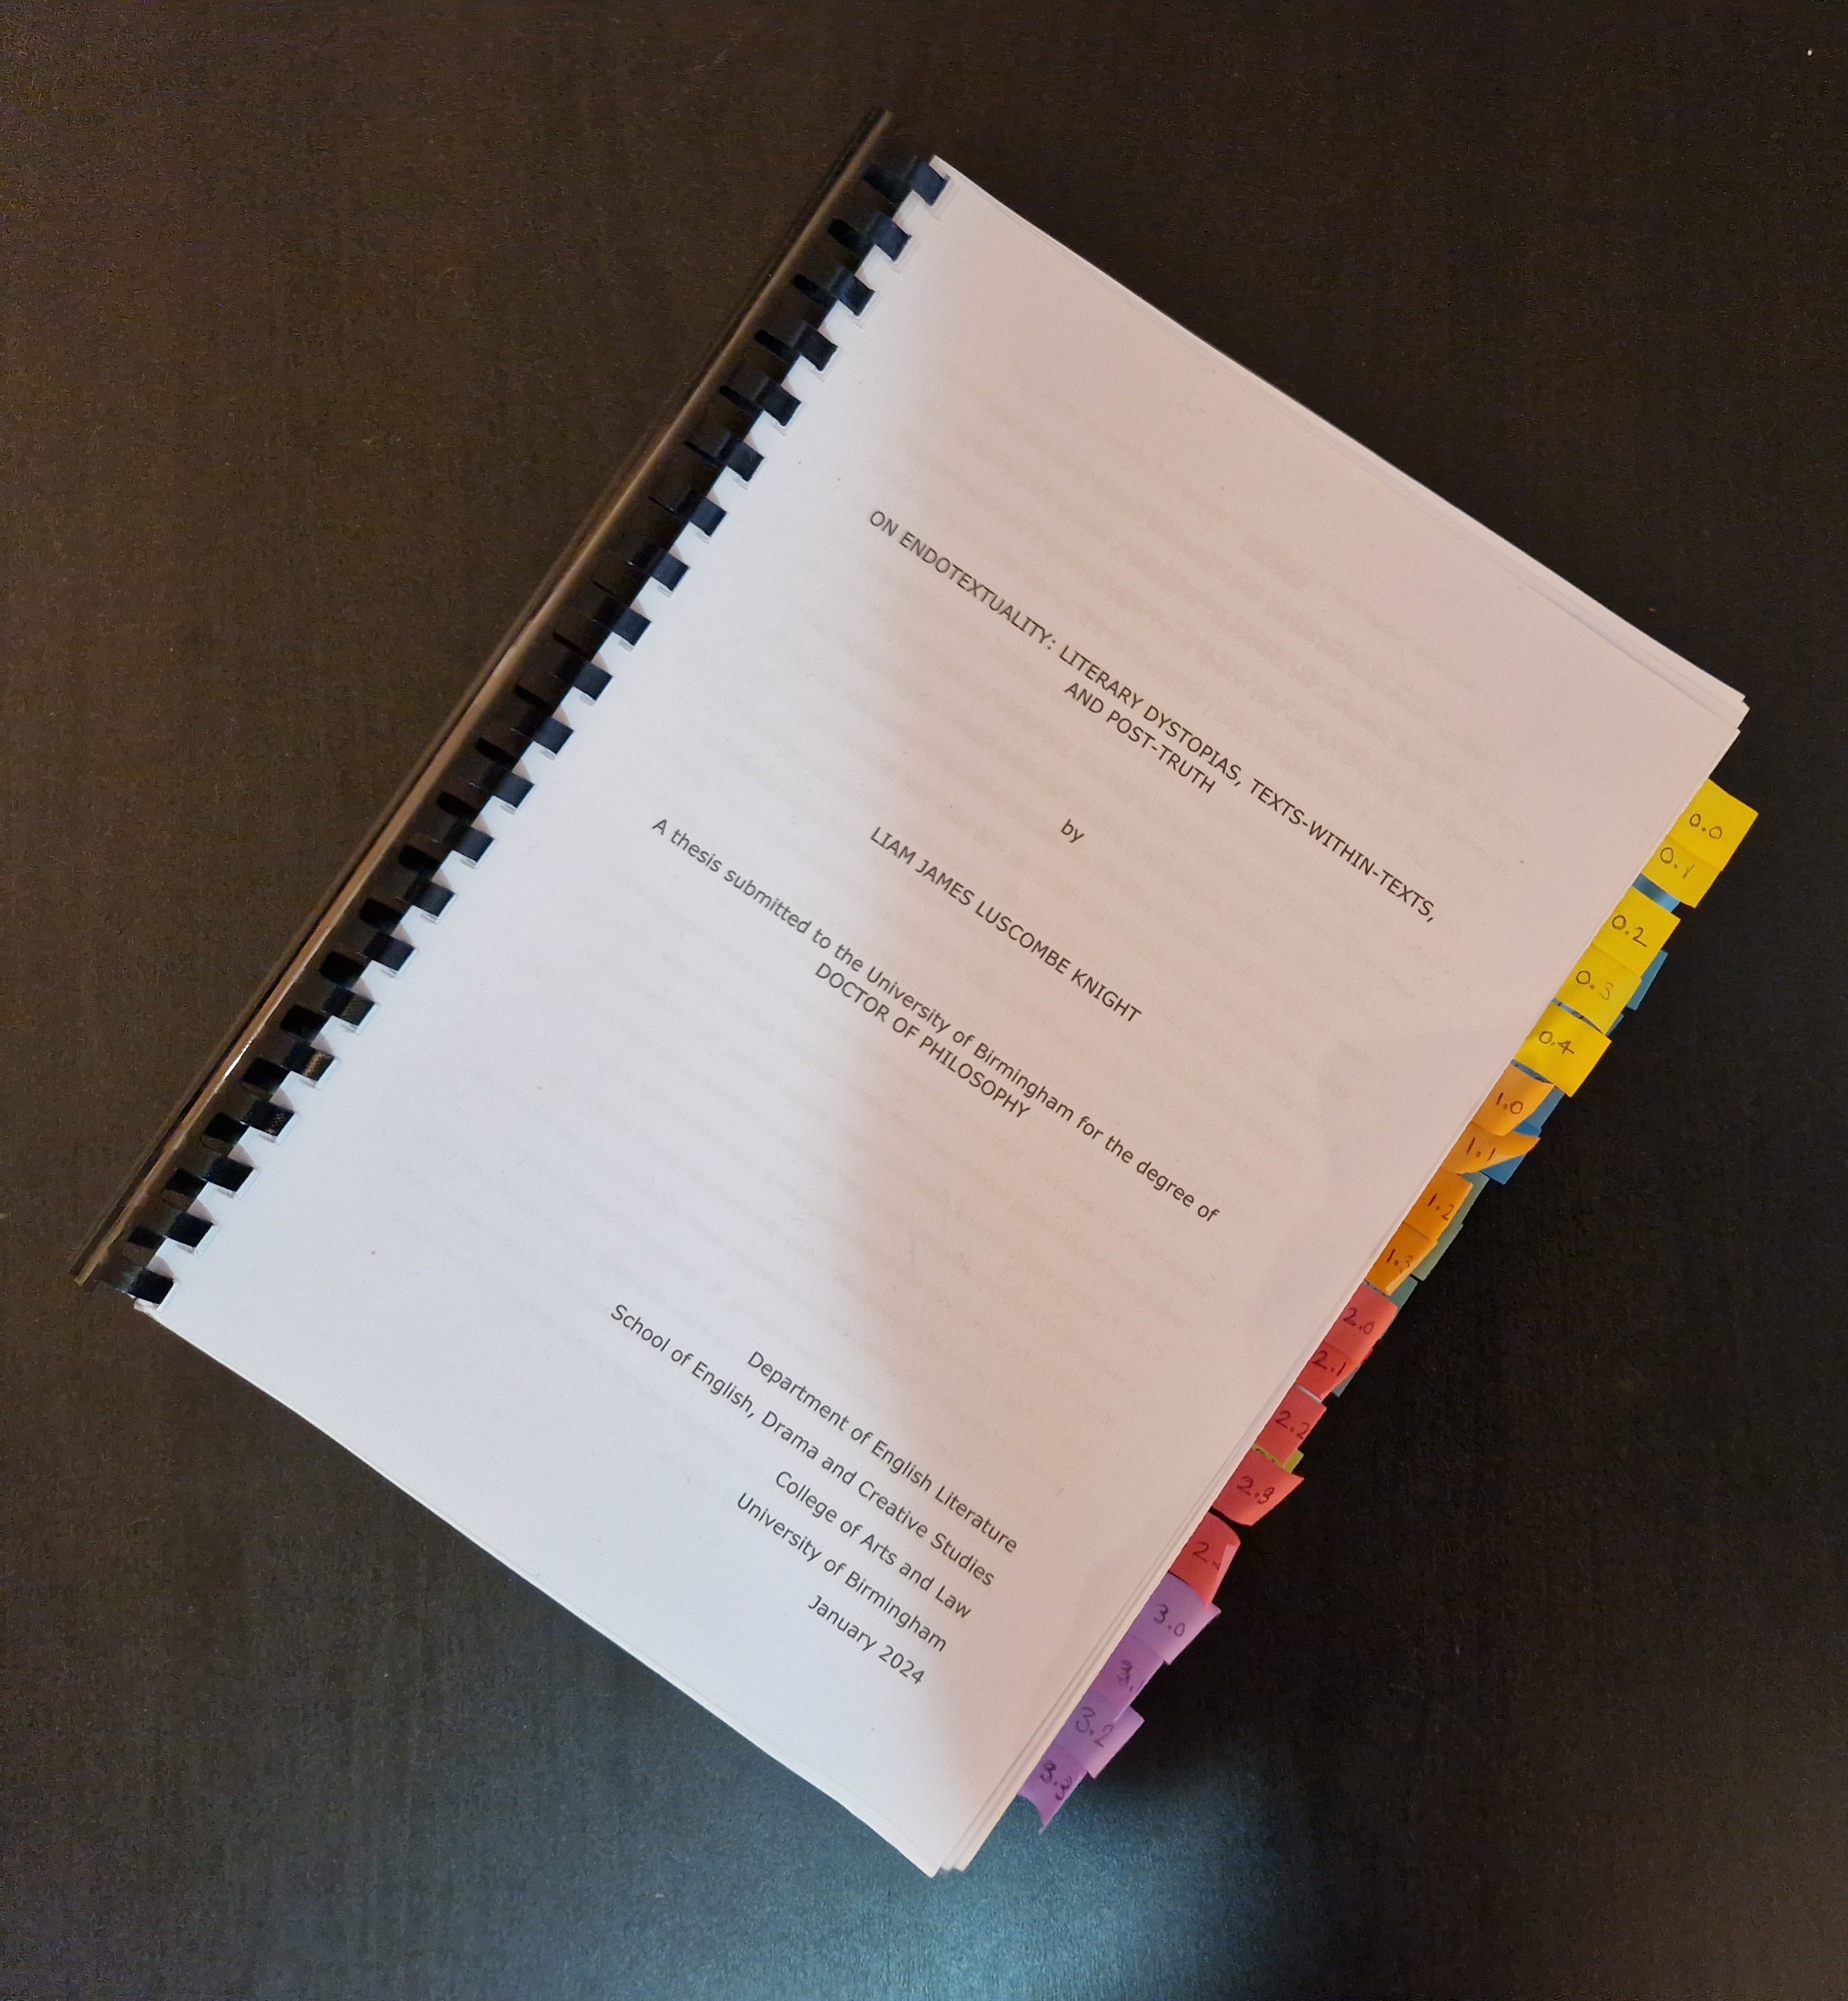 A spiral bound PhD thesis with the title "On endotextuality: literary dystopias, texts-within-texts, and post-truth" with many post-it note tabs sticking out along the right hand edge.